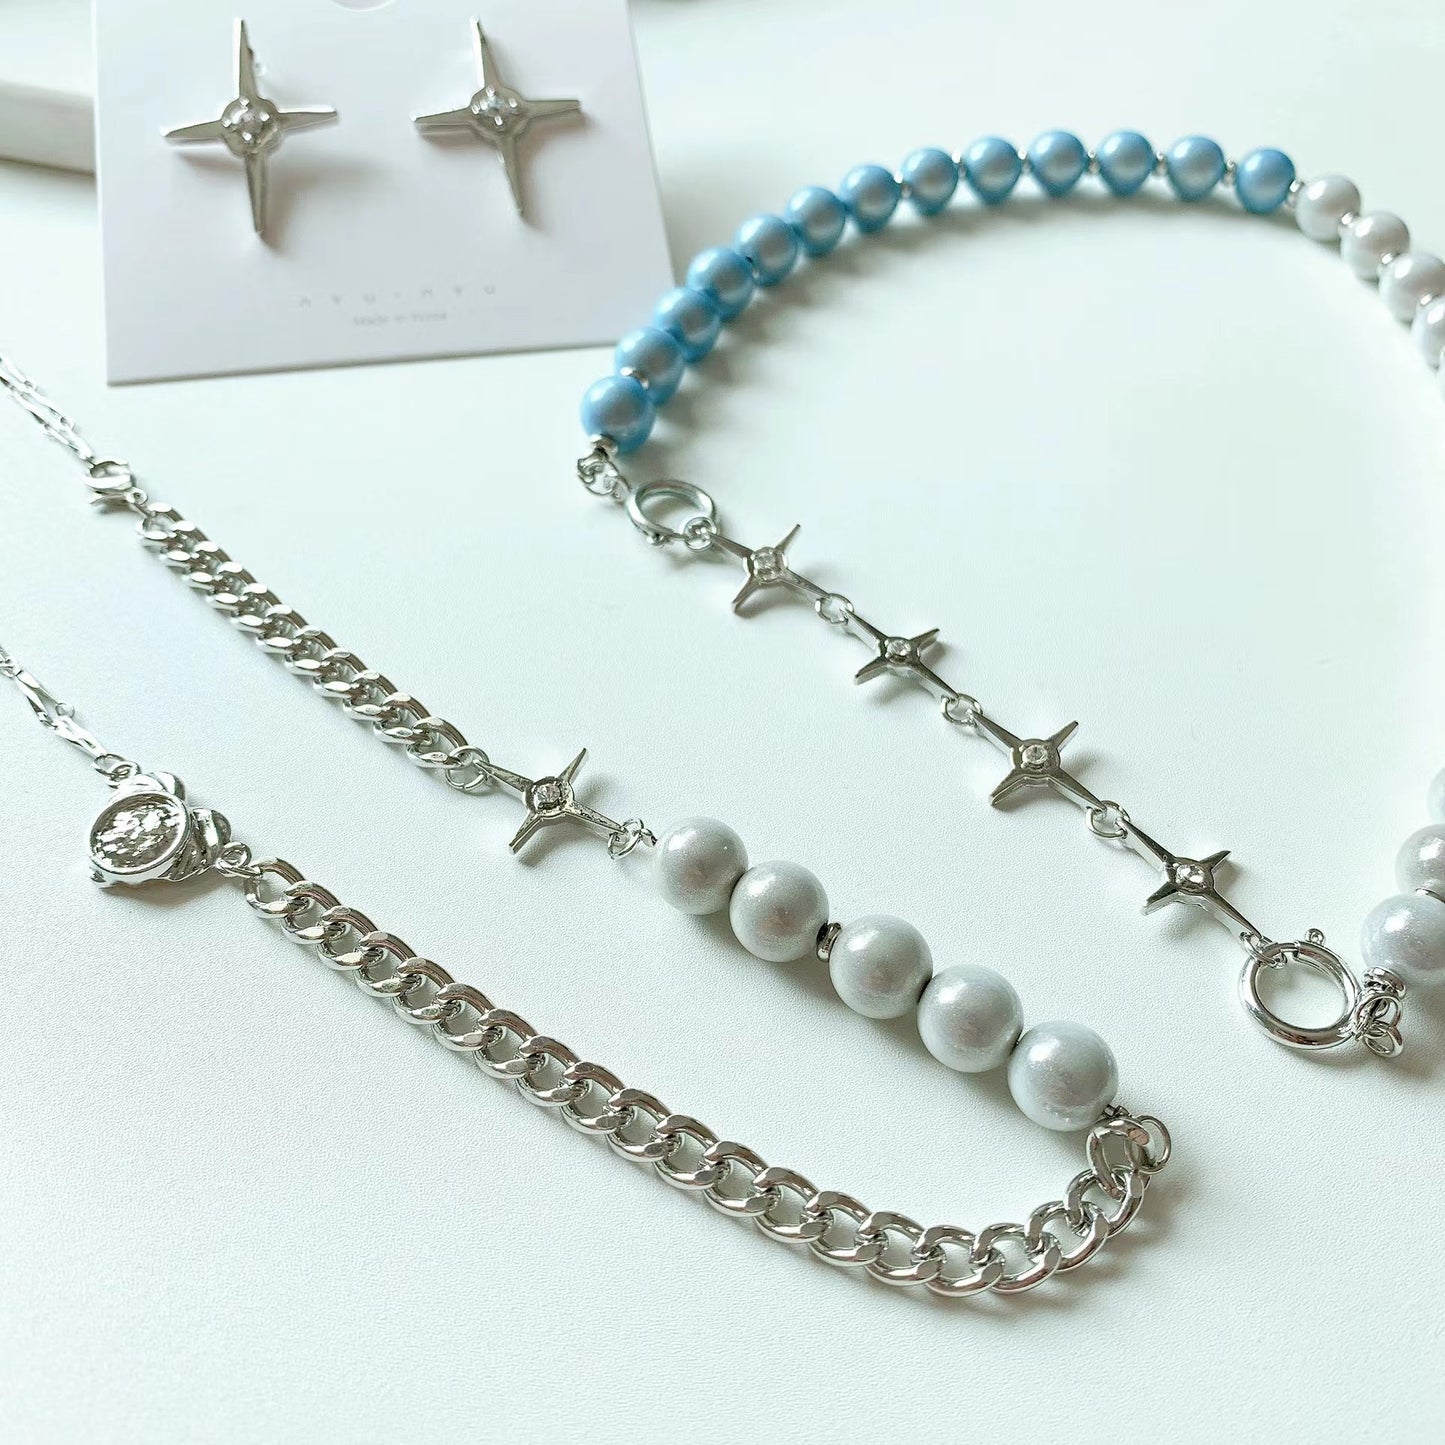 Reflective blue and white pearl cross patchwork necklace